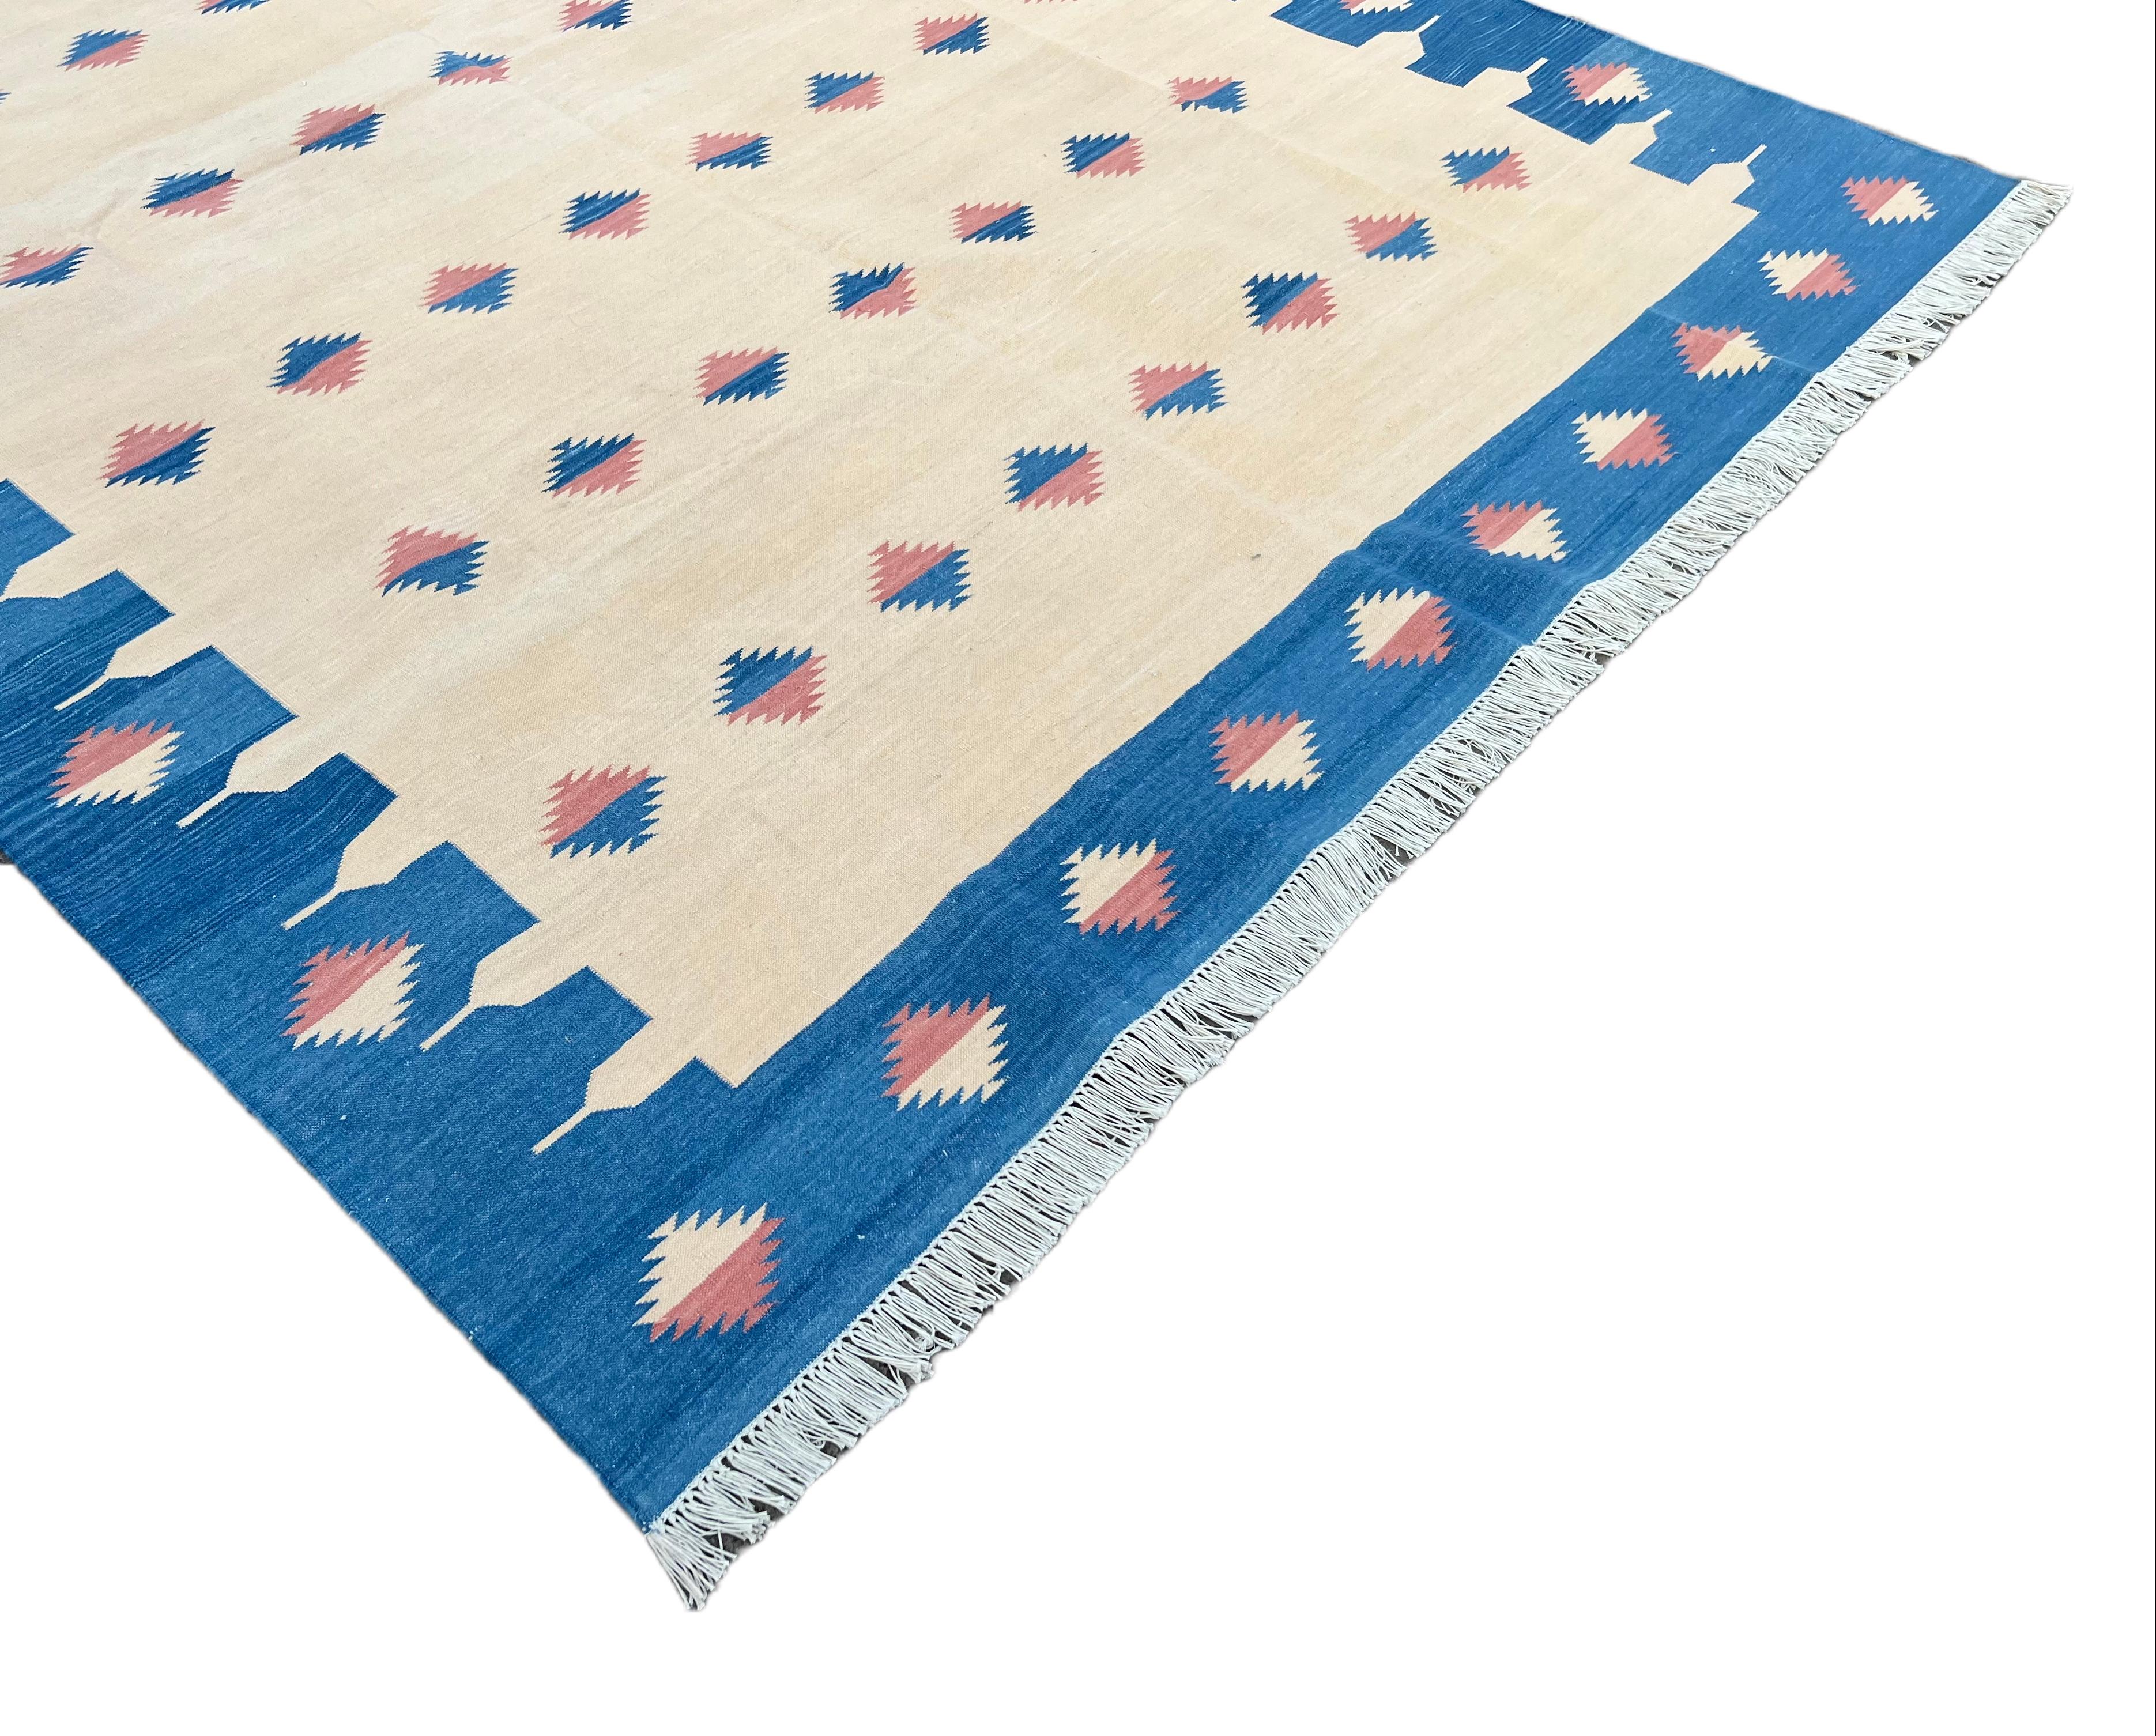 Hand-Woven Handmade Cotton Area Flat Weave Rug, 6x9 Cream And Blue Diamond Indian Dhurrie For Sale